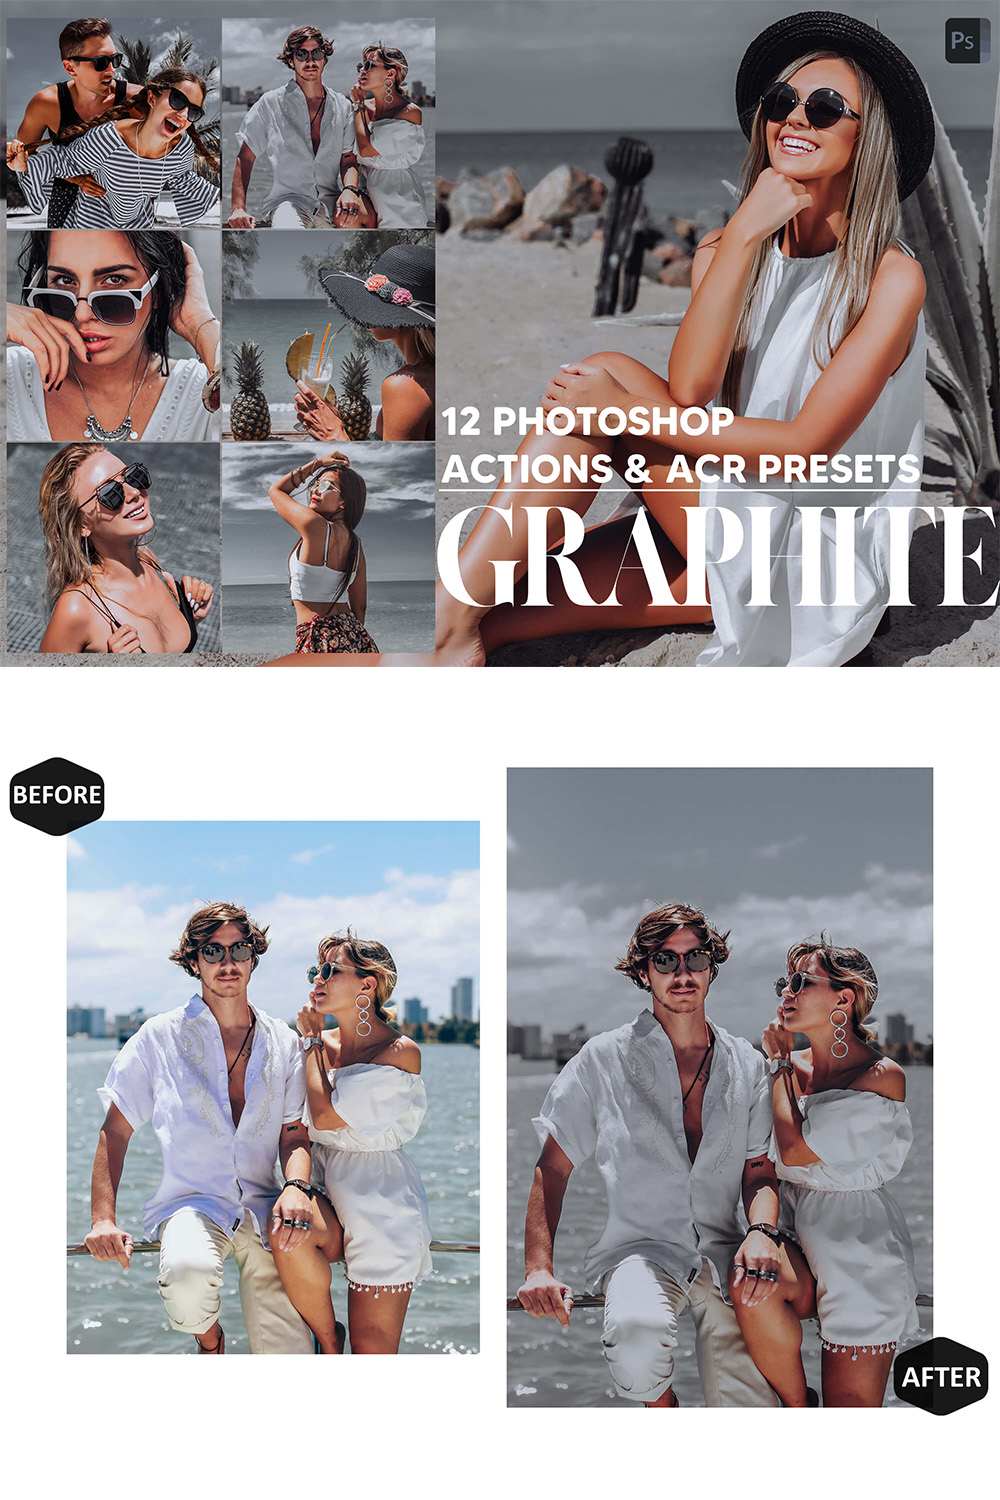 12 Photoshop Actions, Graphite Ps Action, Smooky Gray ACR Preset, Grey Ps Filter, Atn Portrait And Lifestyle Theme For Instagram, Blogger pinterest preview image.